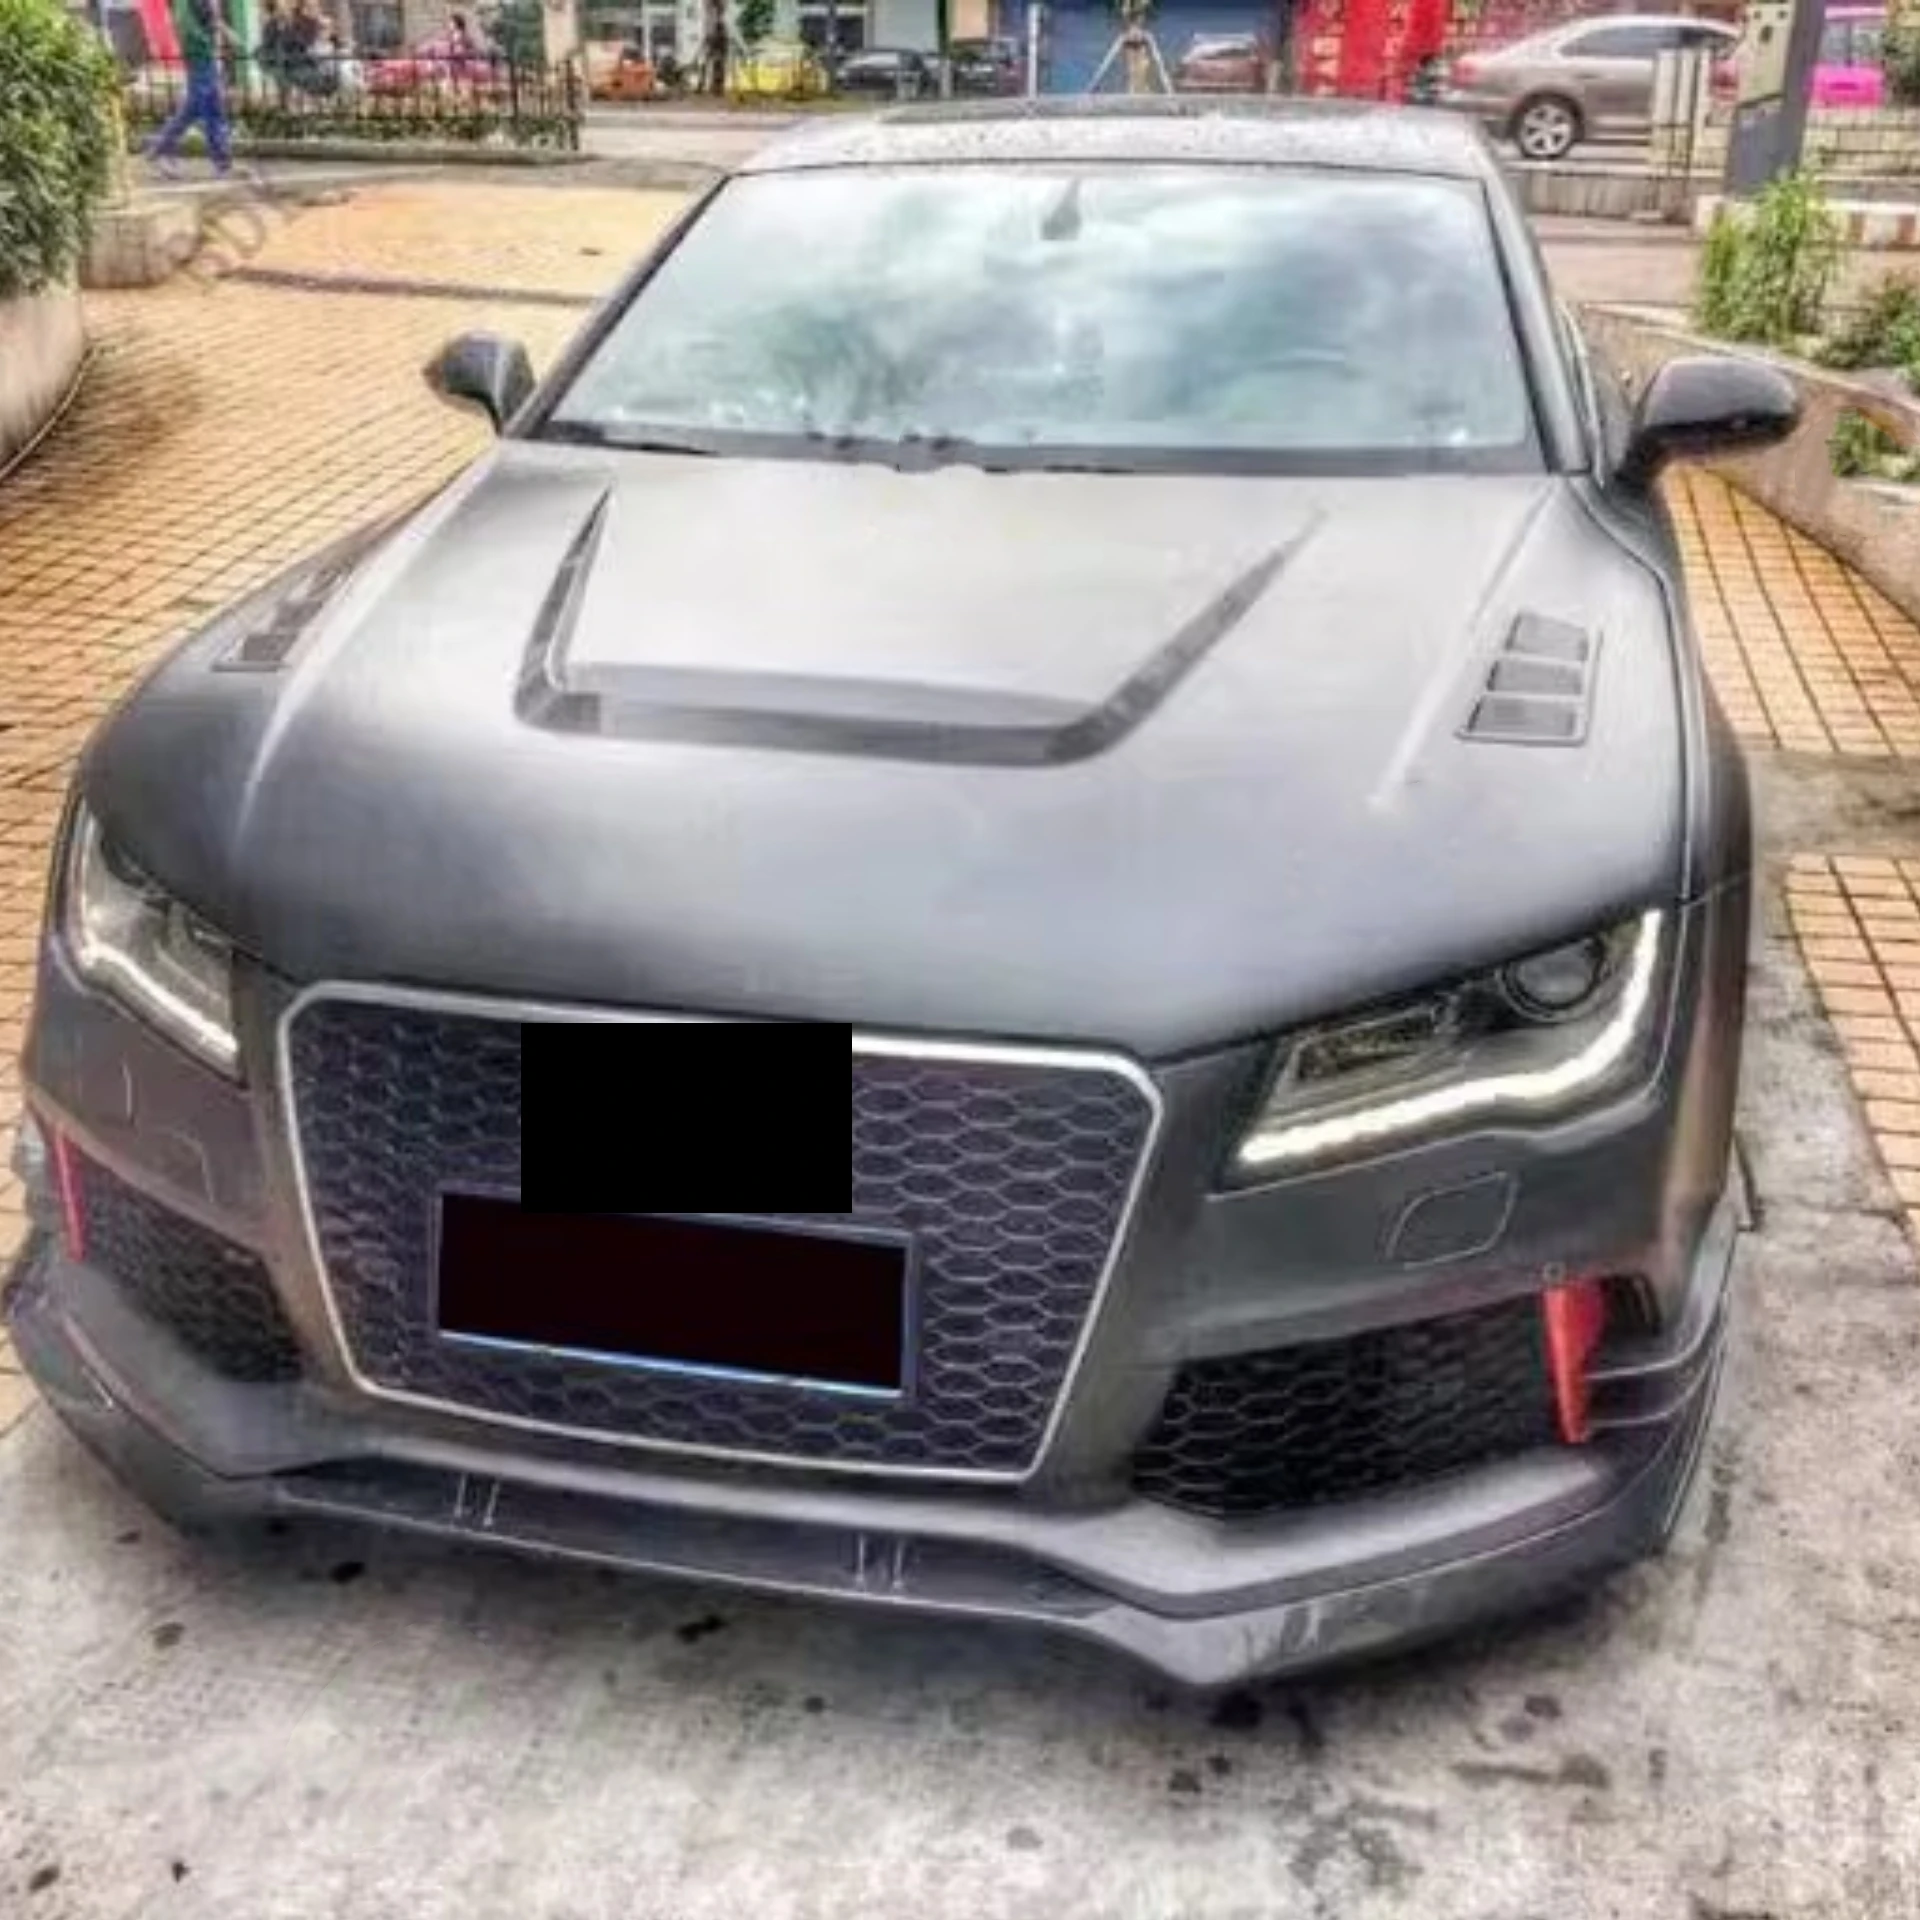 Body Kit Carbon Fiber Engine Cover for Audi A7 S7 RS7 Resin Hood Light Weight Bonnet Car Accessories